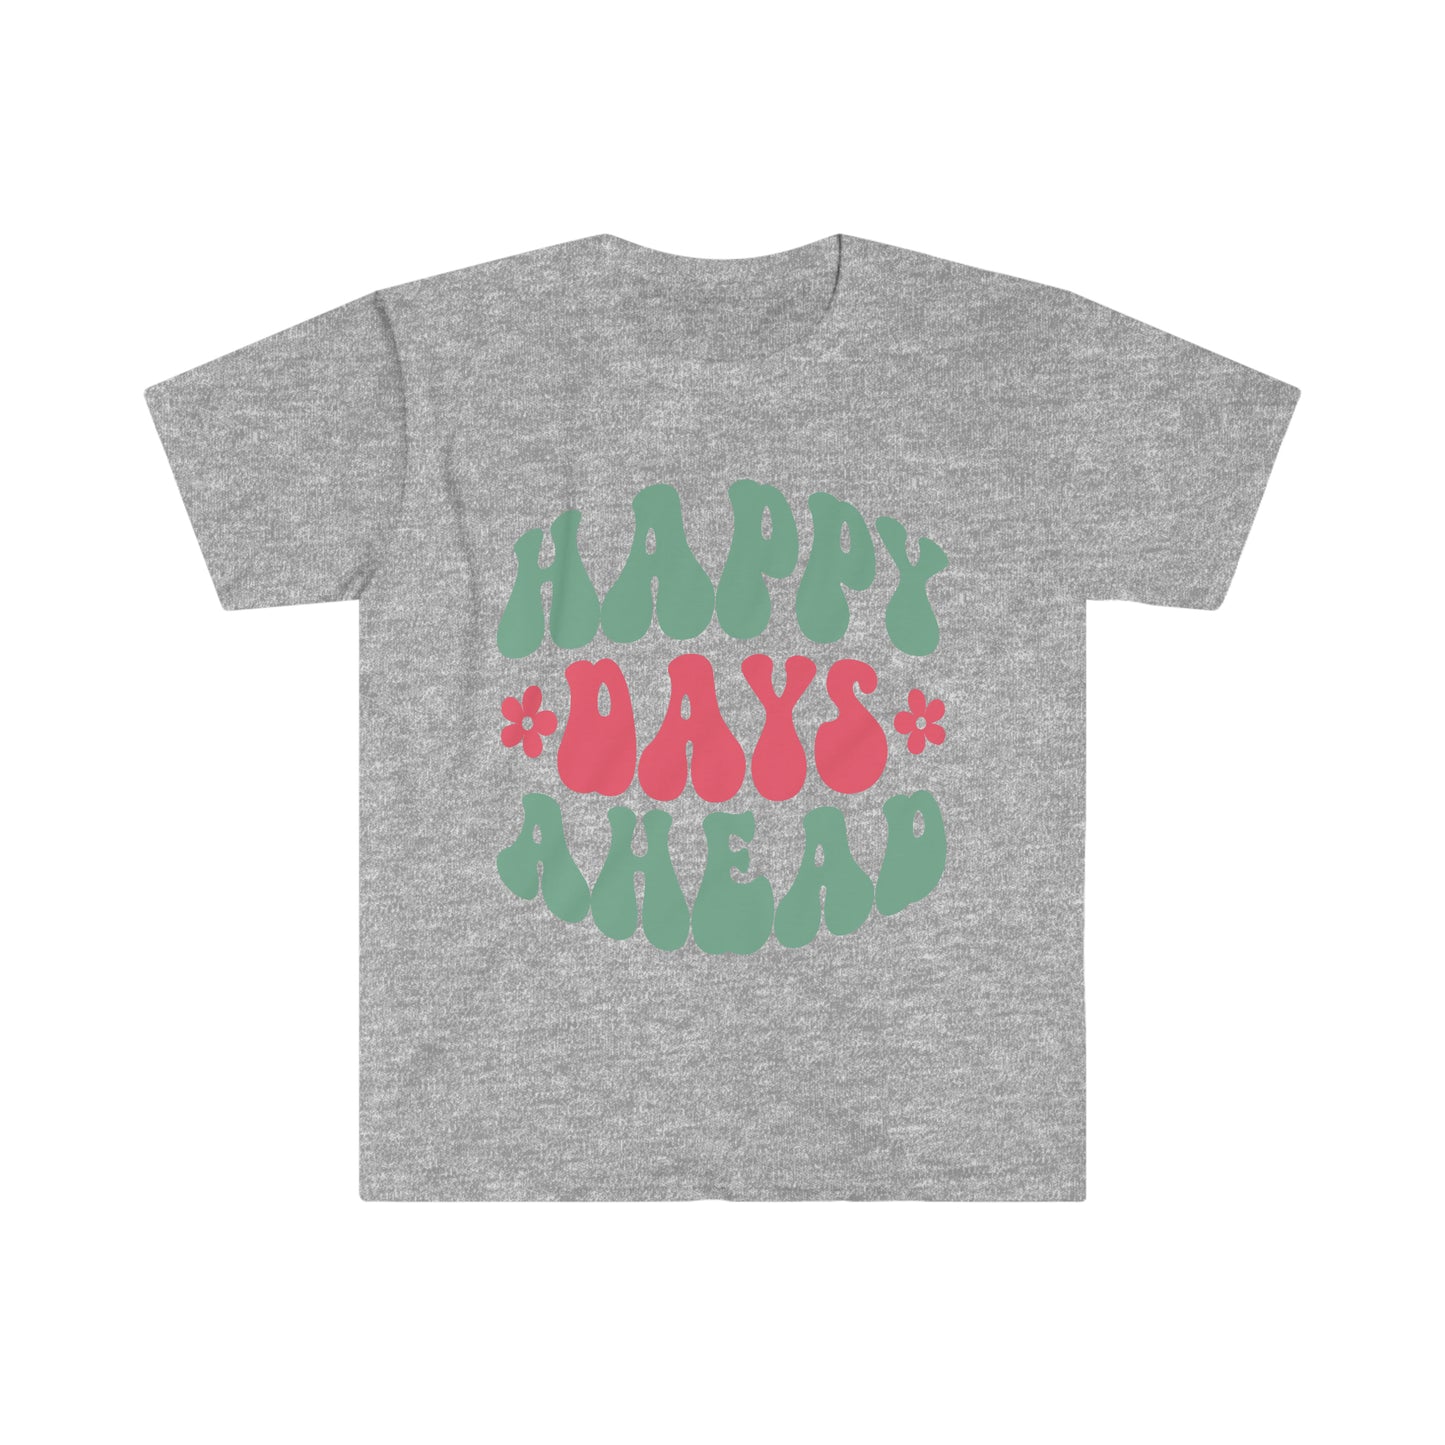 Happy Days Ahead - Unisex Softstyle T-Shirt